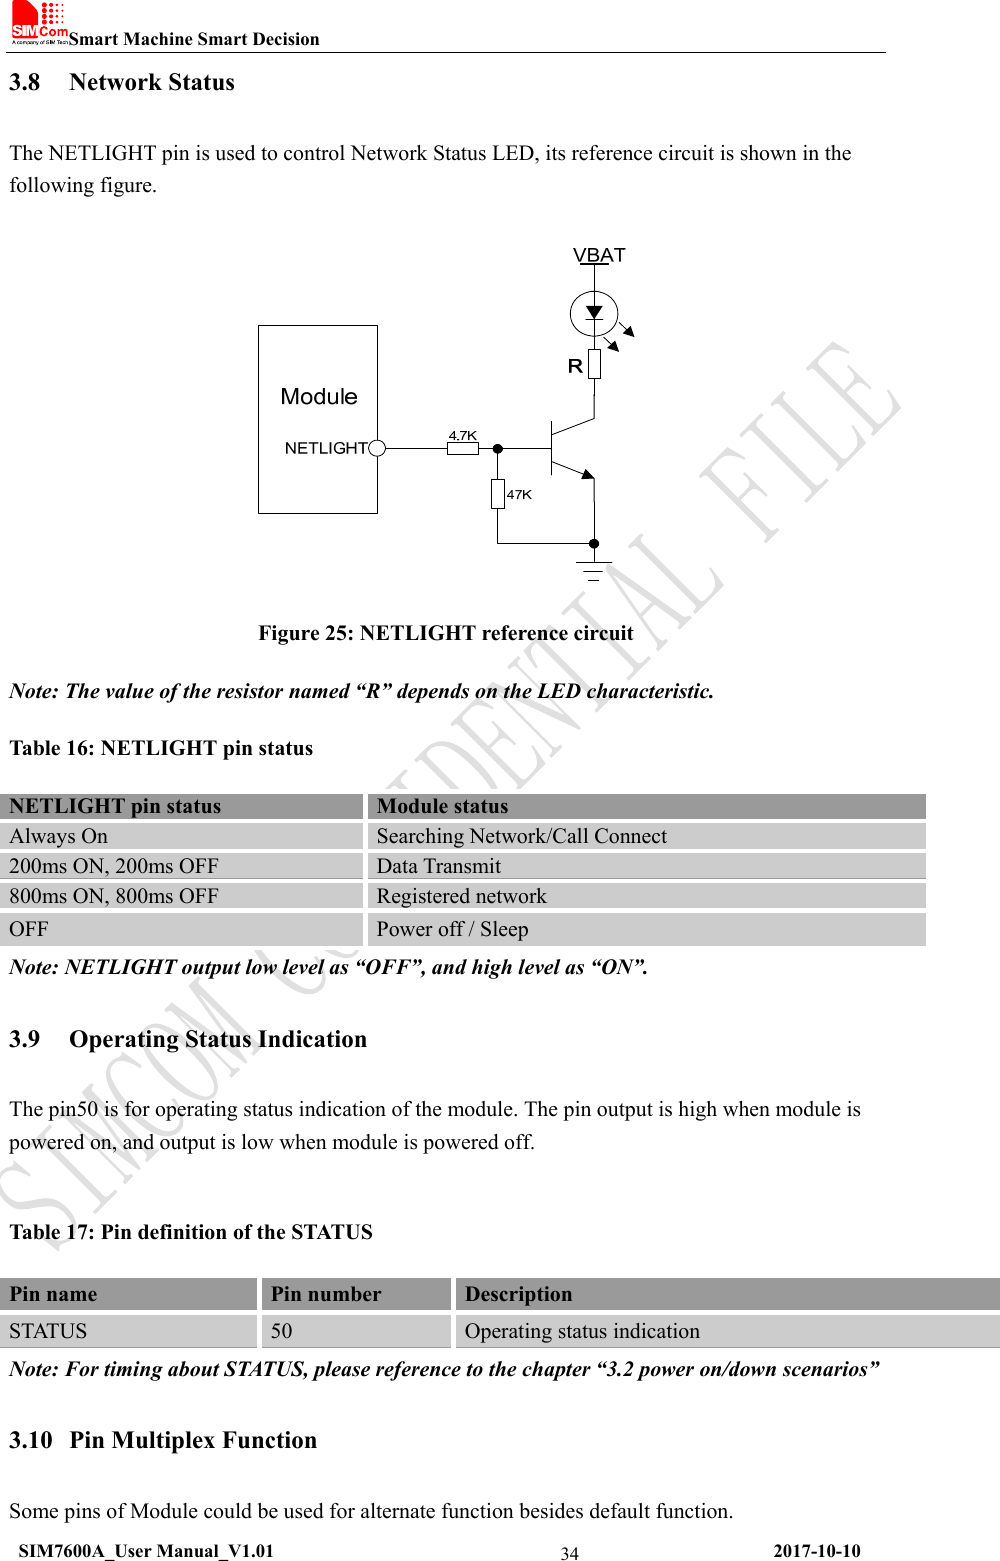 Smart Machine Smart Decision  SIM7600A_User Manual_V1.01                                                     2017-10-10 343.8 Network Status The NETLIGHT pin is used to control Network Status LED, its reference circuit is shown in the following figure.   Figure 25: NETLIGHT reference circuit Note: The value of the resistor named “R” depends on the LED characteristic. Table 16: NETLIGHT pin status NETLIGHT pin status    Module status Always On  Searching Network/Call Connect 200ms ON, 200ms OFF  Data Transmit 800ms ON, 800ms OFF  Registered network OFF  Power off / Sleep Note: NETLIGHT output low level as “OFF”, and high level as “ON”. 3.9 Operating Status Indication The pin50 is for operating status indication of the module. The pin output is high when module is powered on, and output is low when module is powered off.  Table 17: Pin definition of the STATUS Pin name  Pin number  Description STATUS  50  Operating status indication Note: For timing about STATUS, please reference to the chapter “3.2 power on/down scenarios” 3.10 Pin Multiplex Function Some pins of Module could be used for alternate function besides default function. 